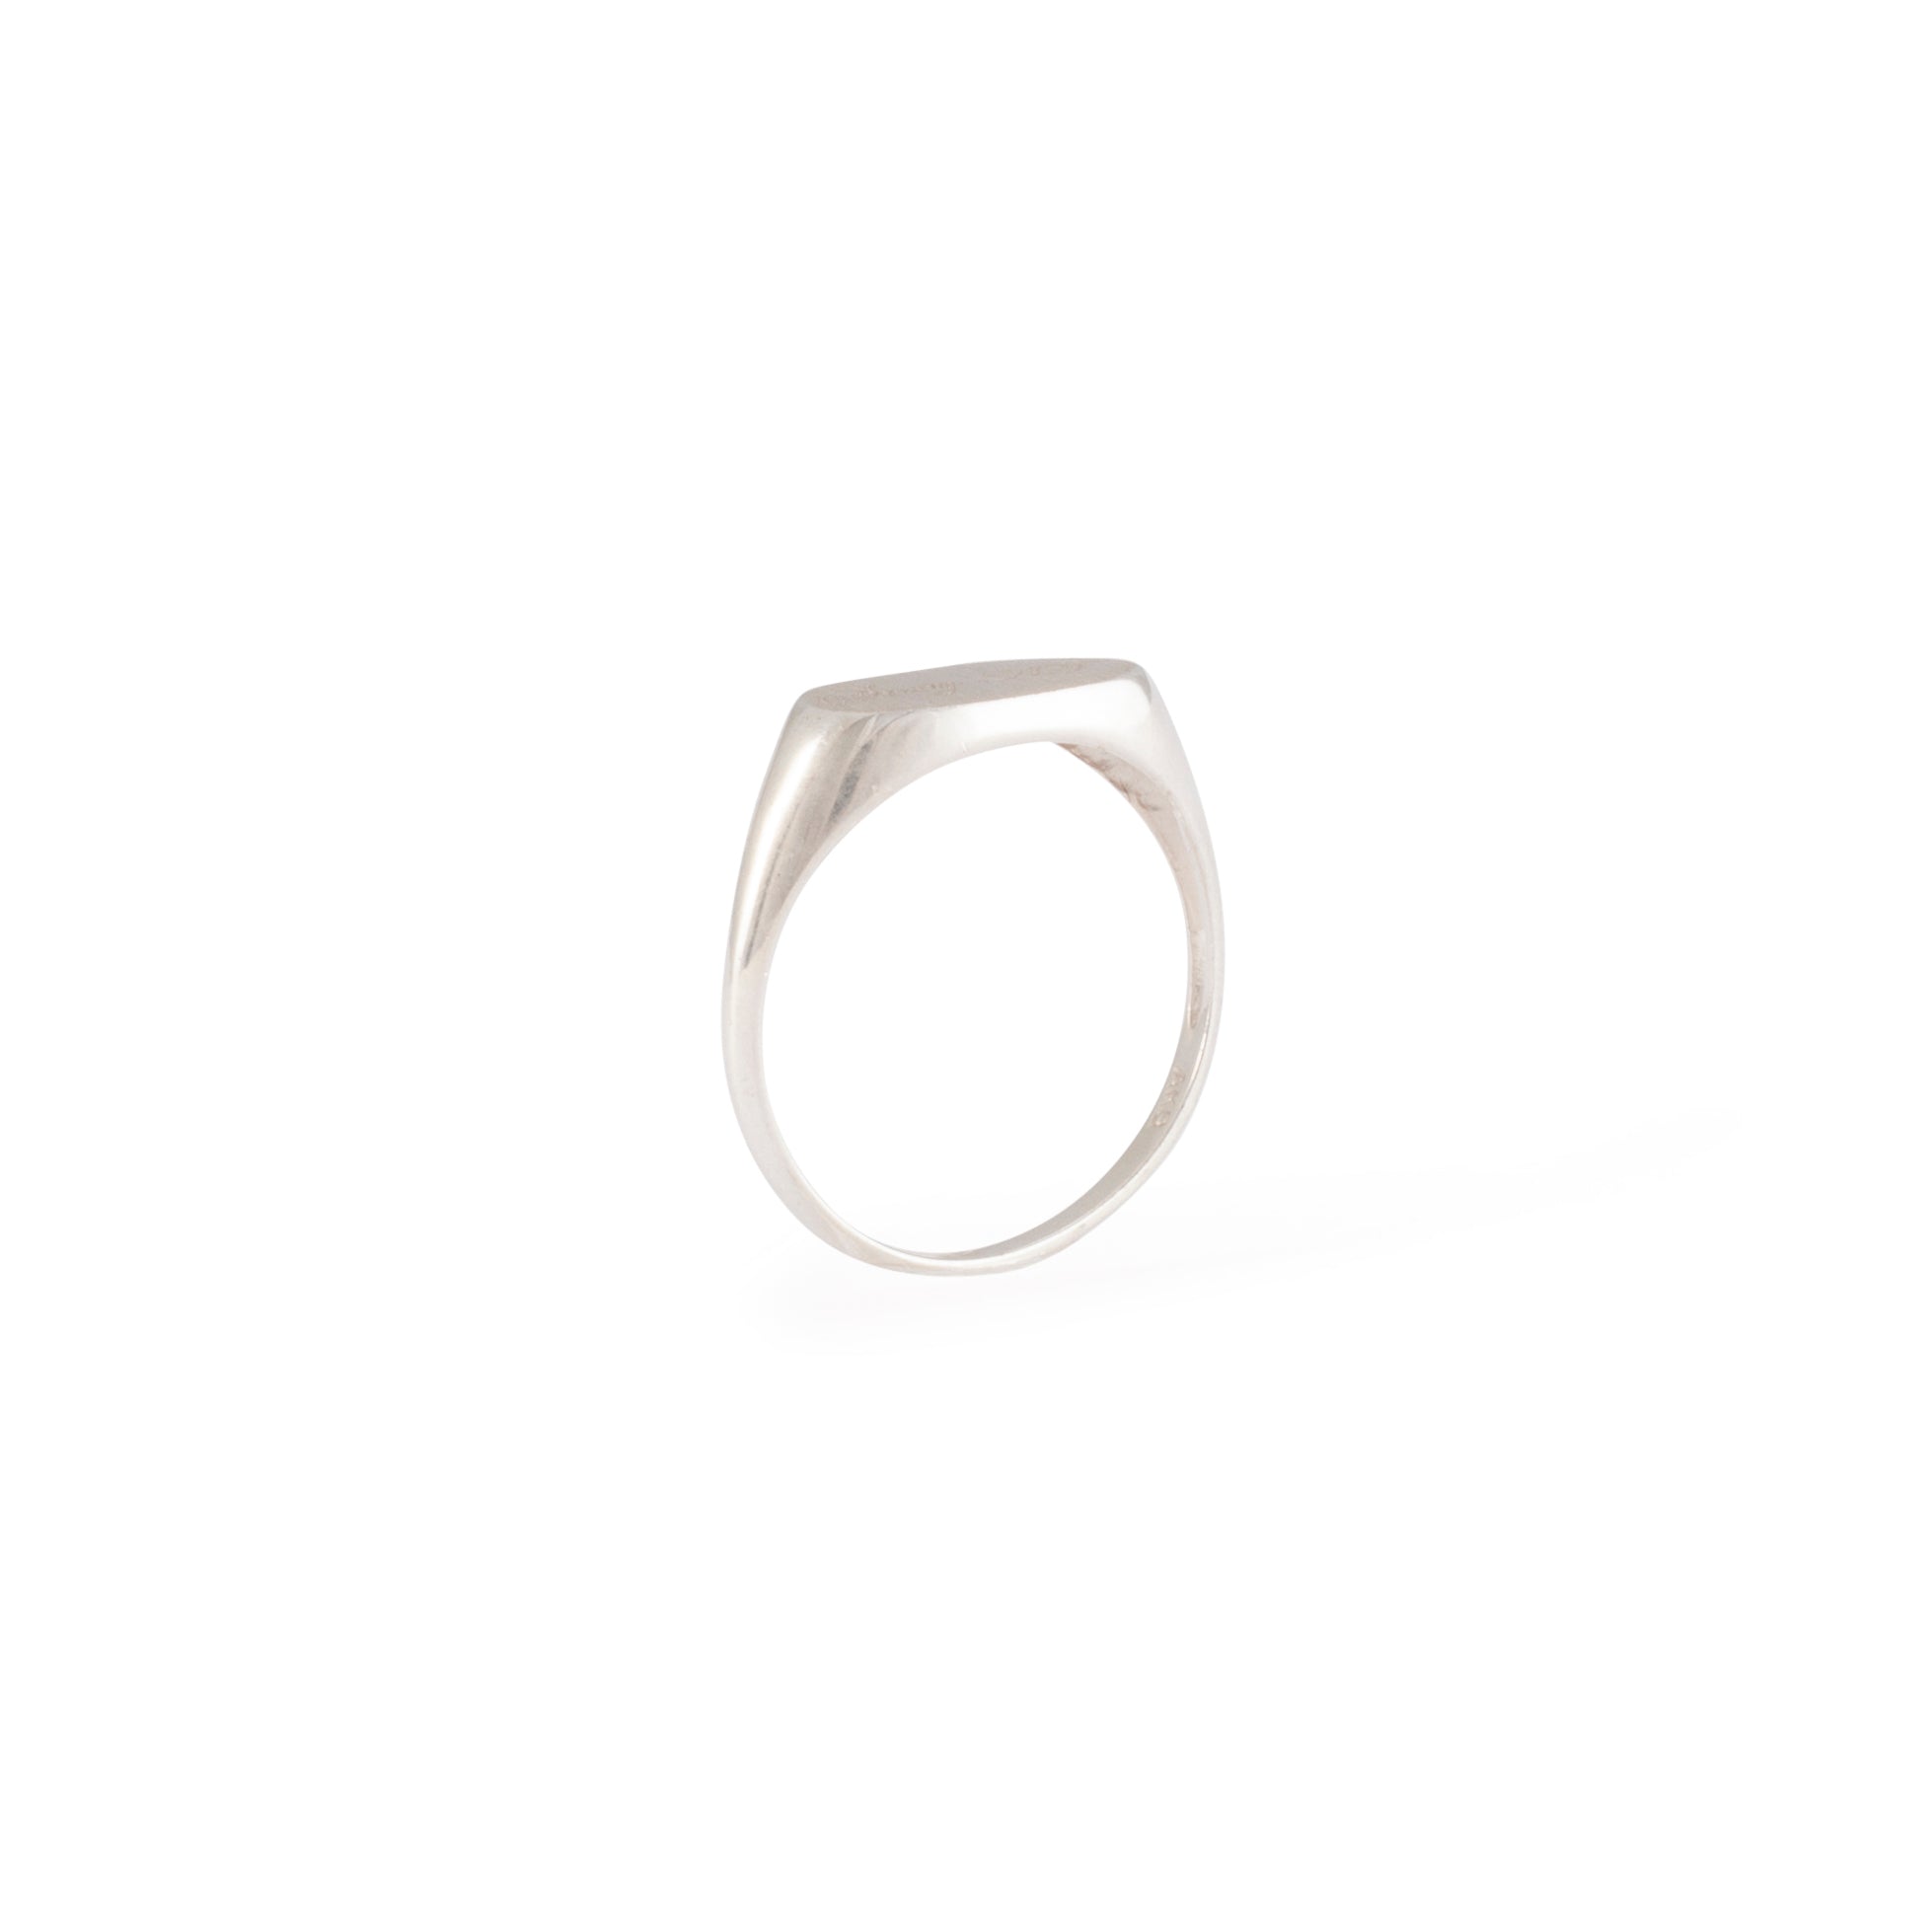 East/west signet ring